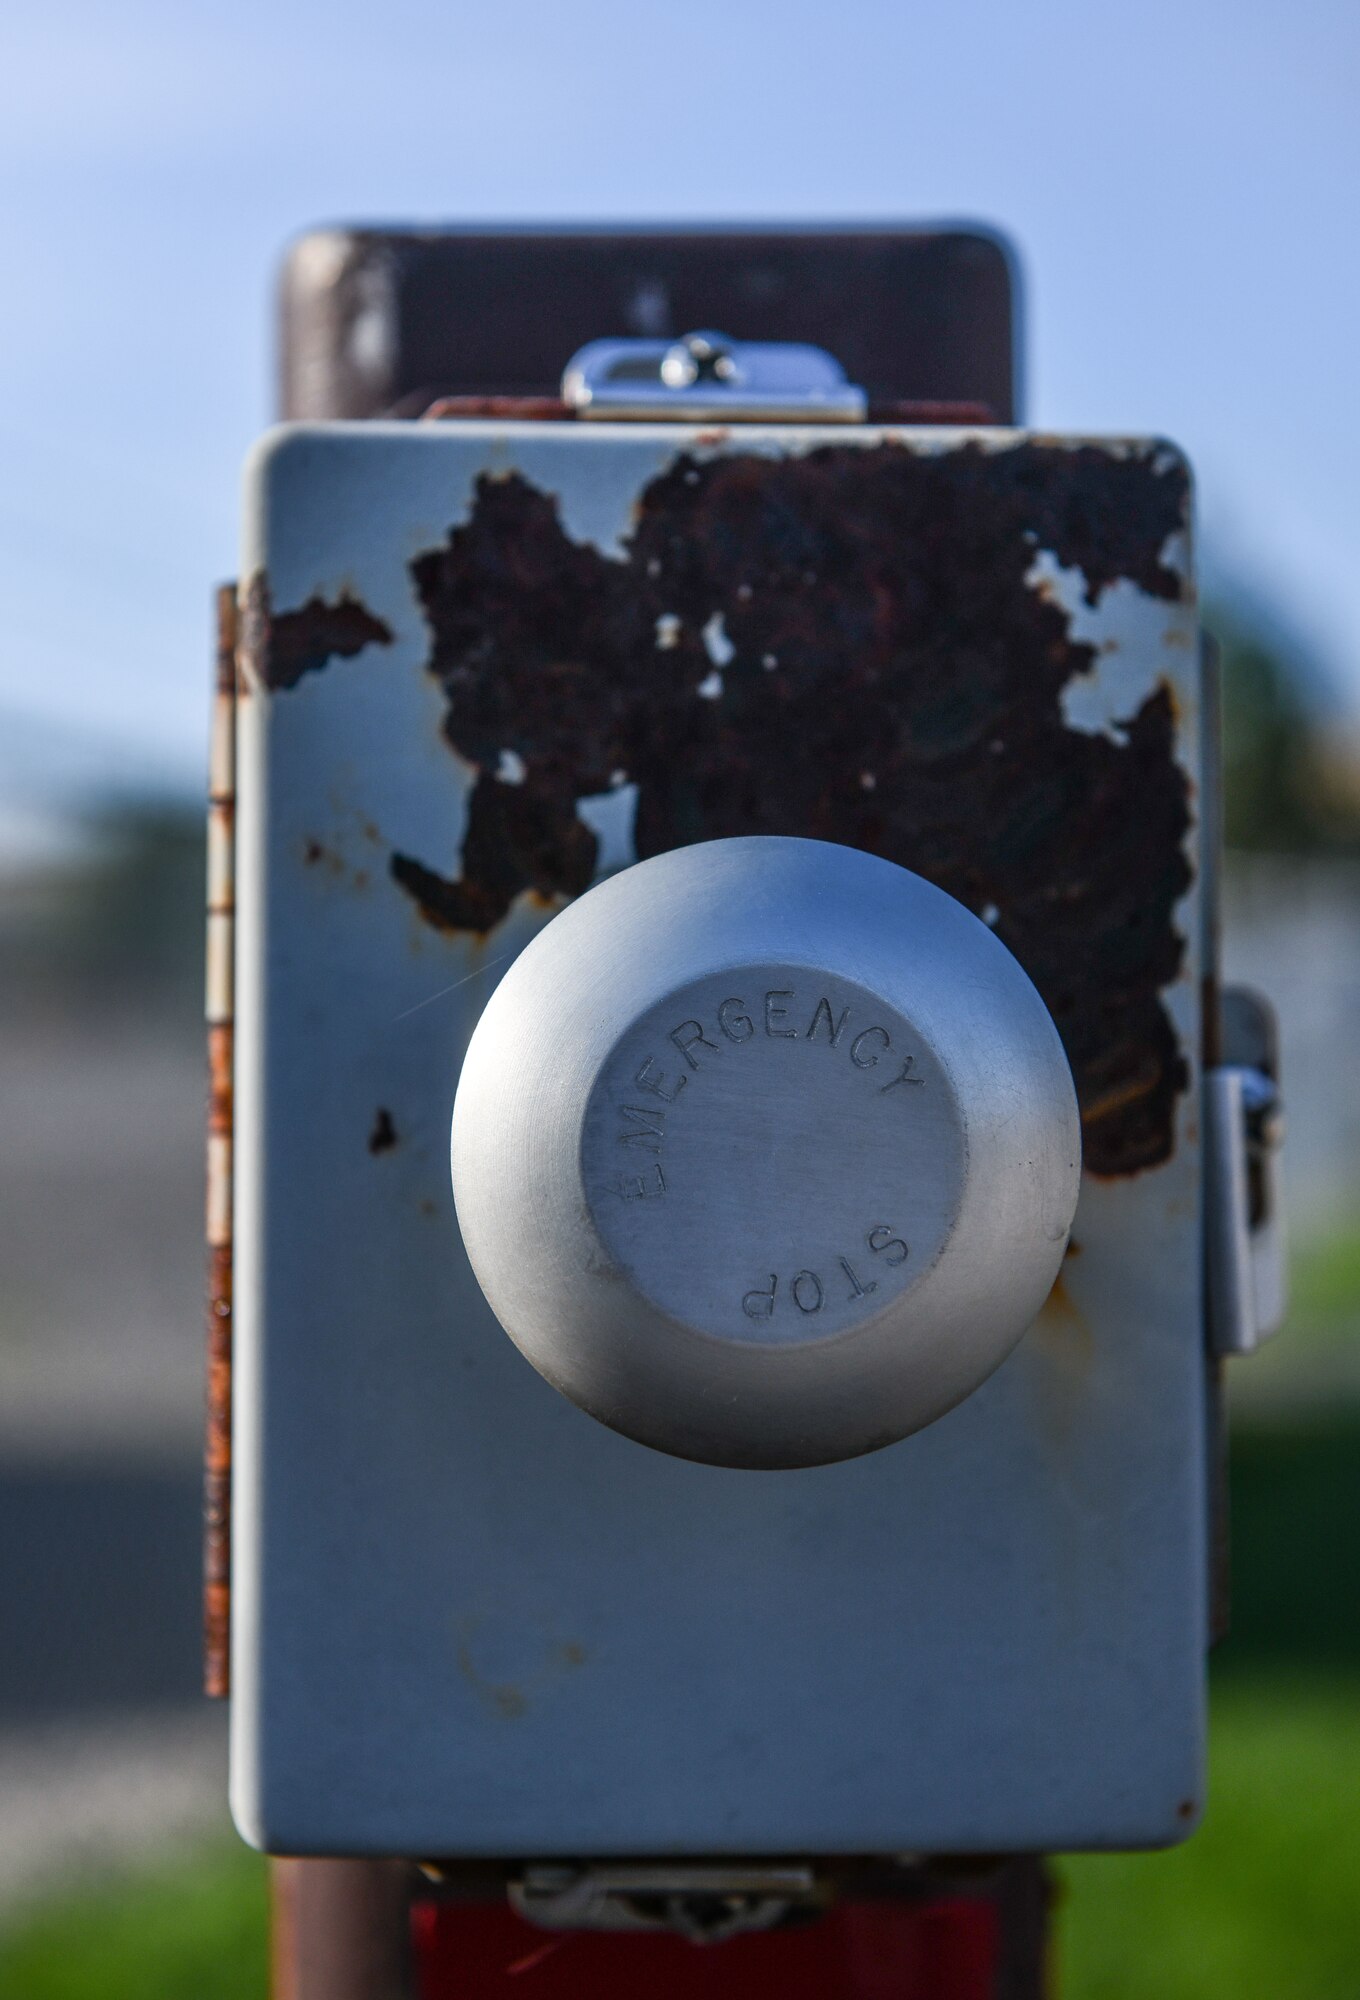 A fuel emergency shut-off switch near a government vehicle fuel station at Whiteman Air Force Base, Missouri, July 22, 2020. (U.S. Air Force photo by Tech. Sgt. Alexander W. Riedel)